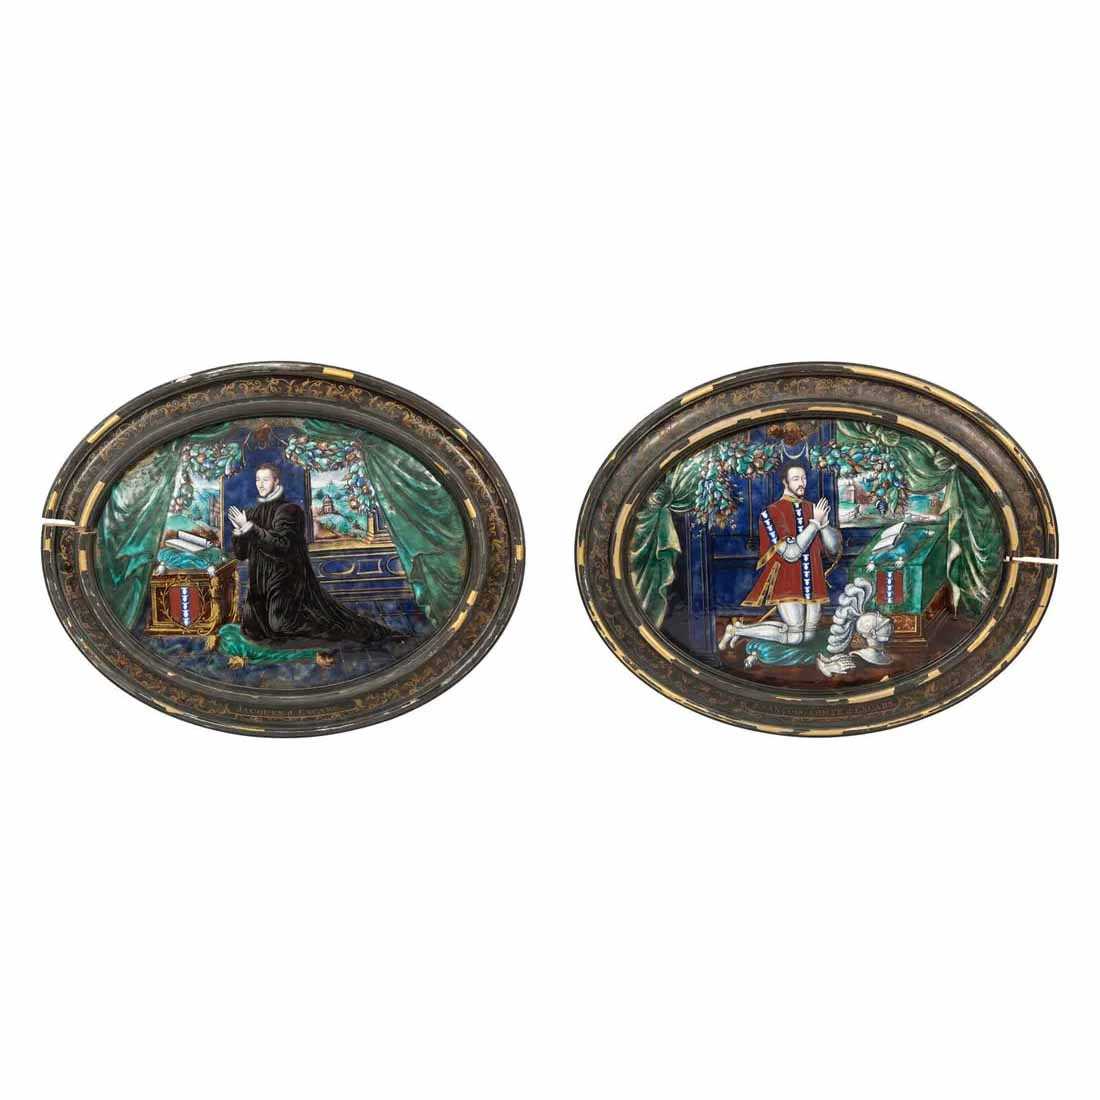 Pair of Limoges Enameled Copper Plaques Attributed to Leonard Limousin, which sold for $410,000 ($537,100 with buyer's premium) at Freeman's Hindman.